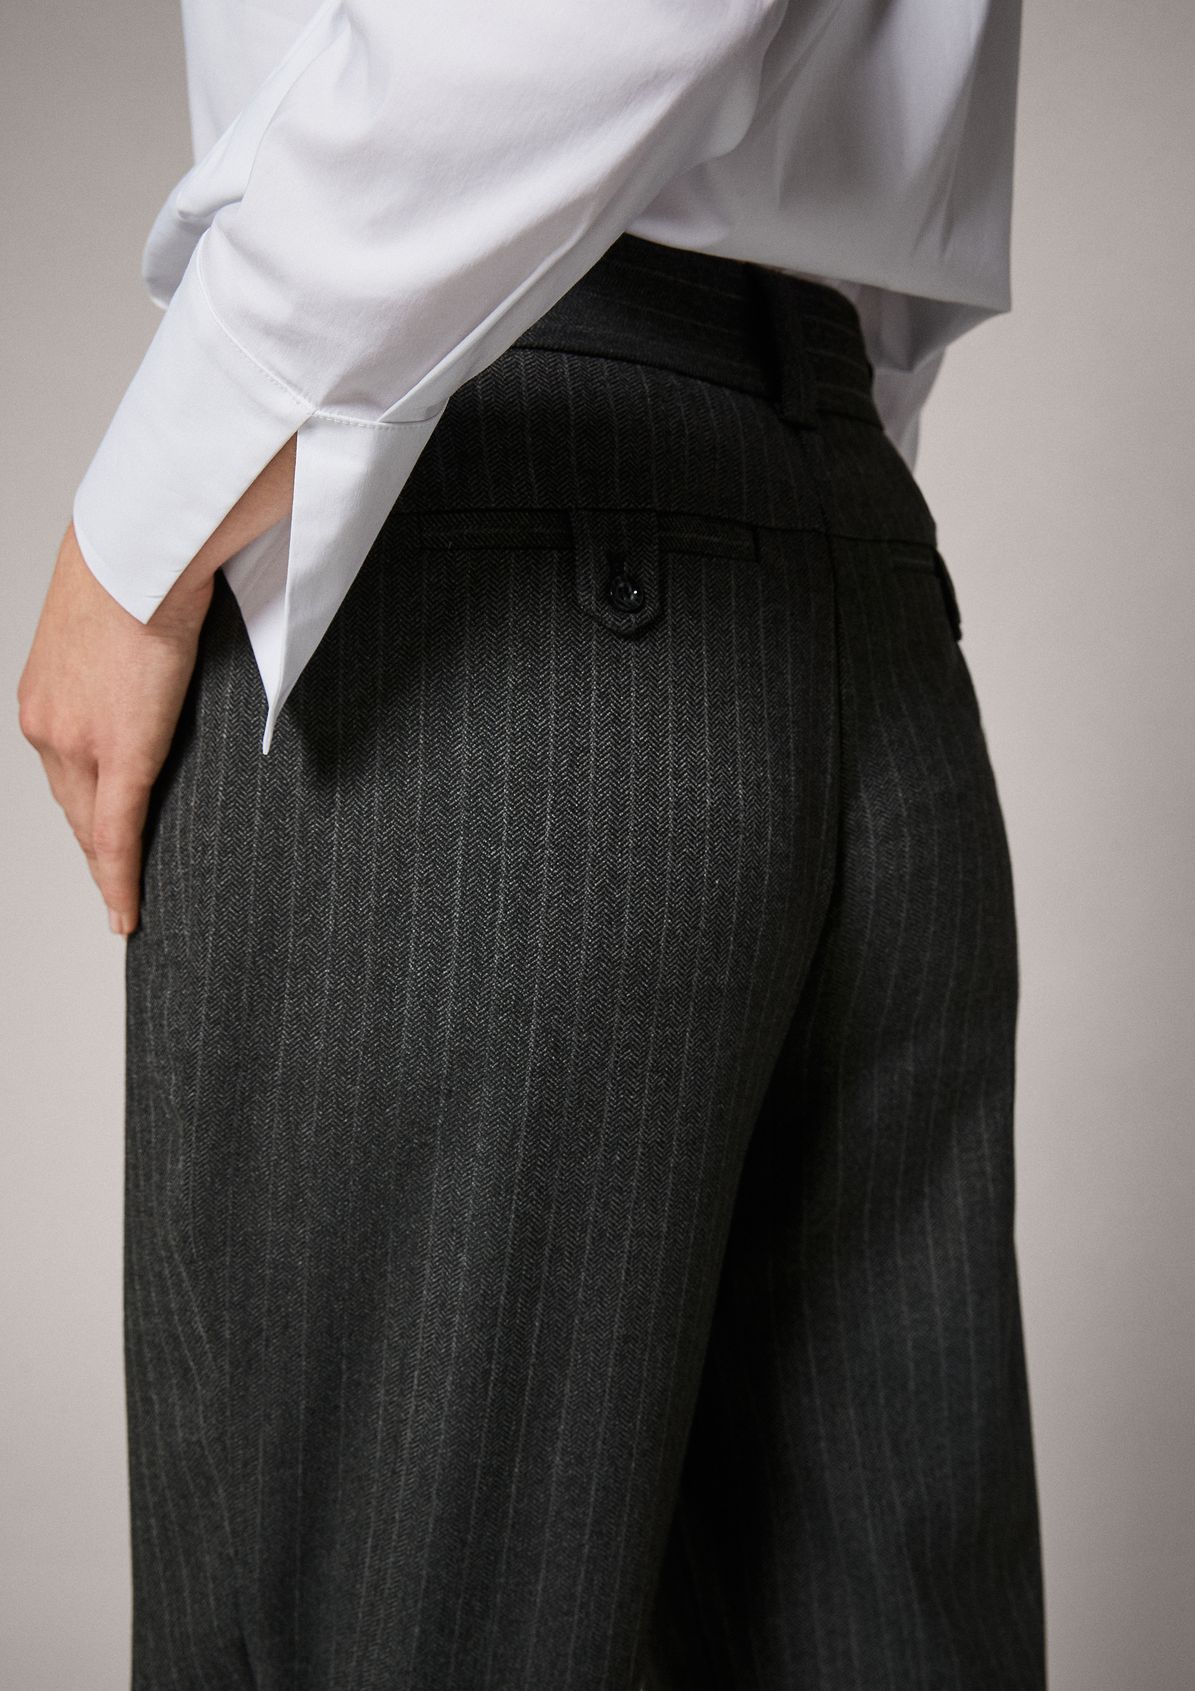 Regular: pinstripe trousers from comma